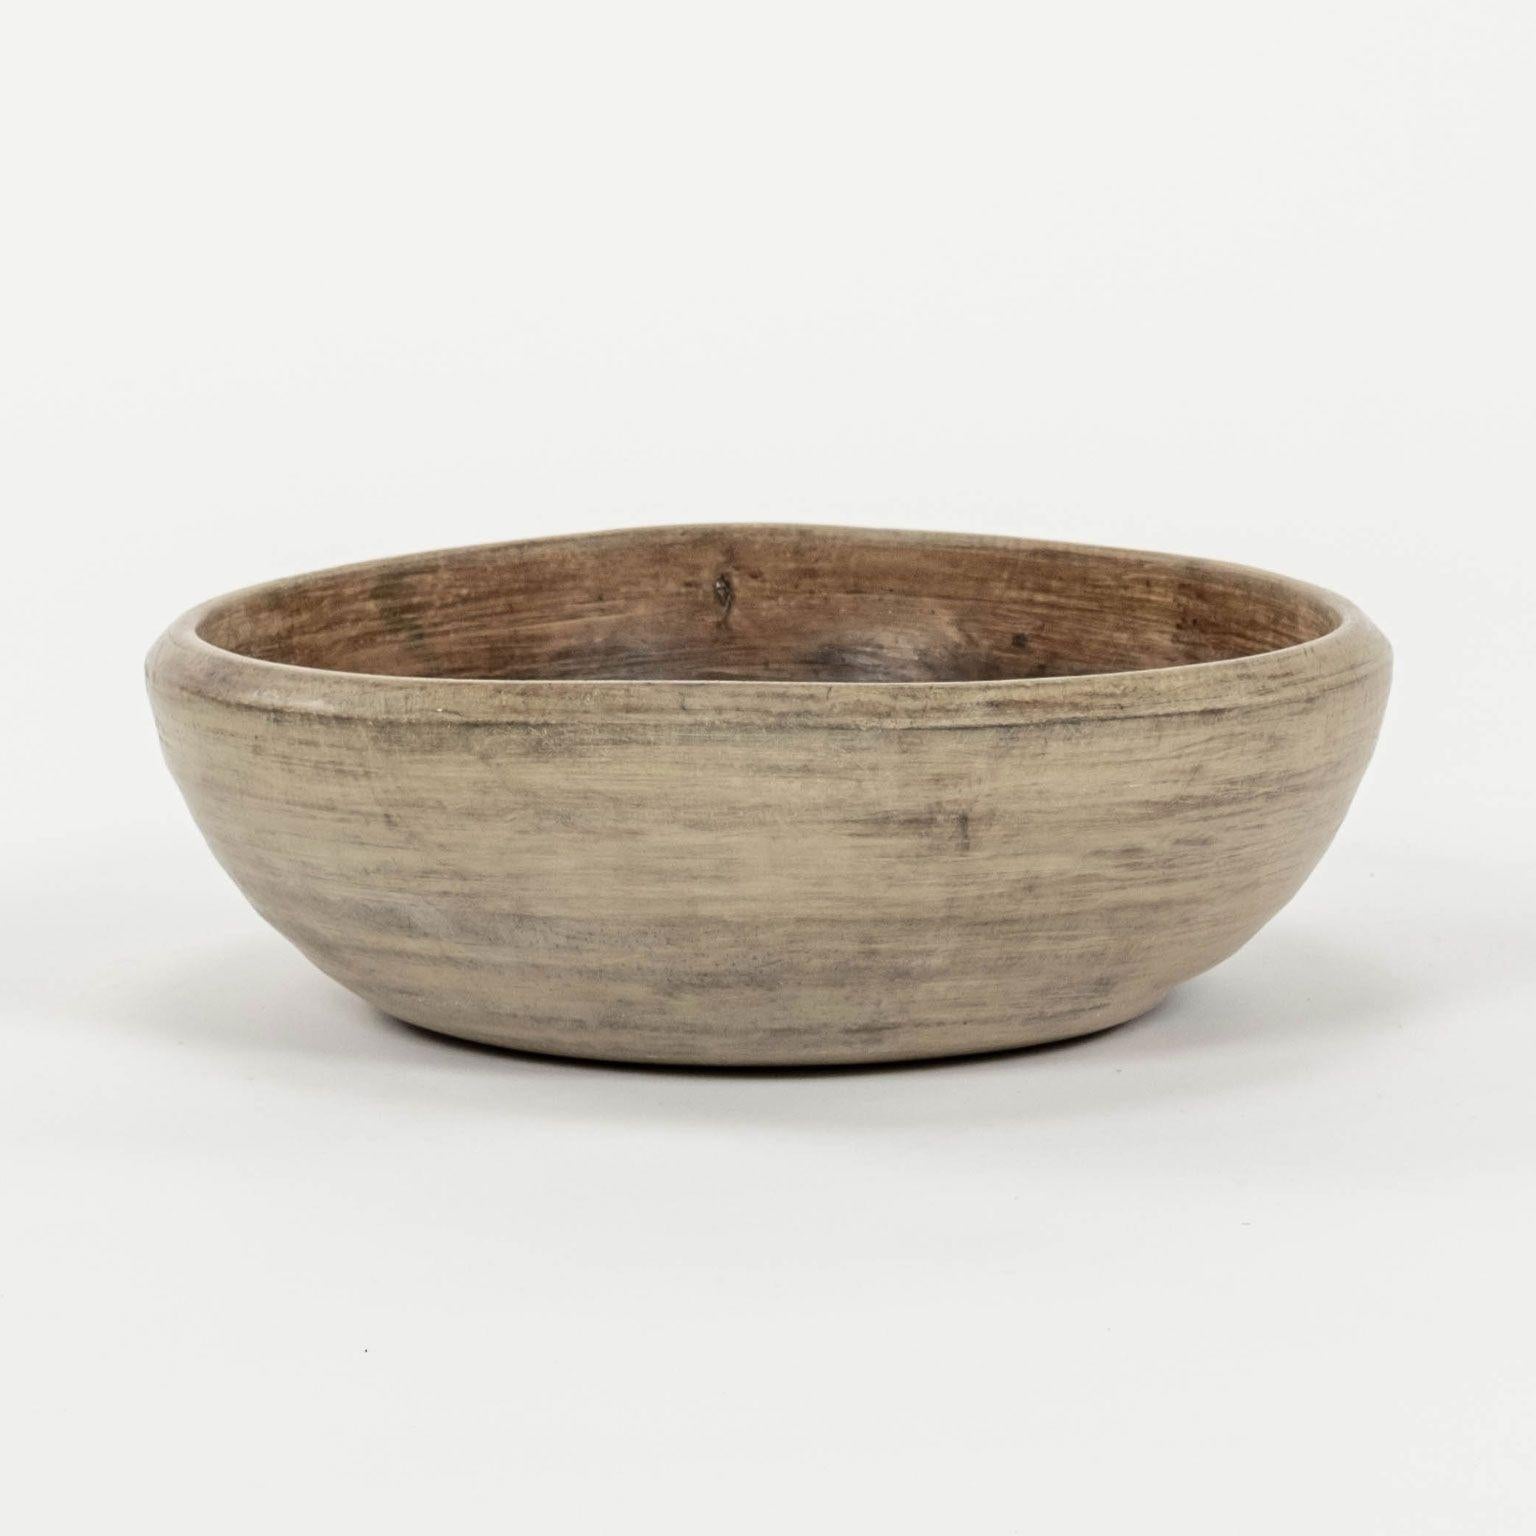 Large Swedish turned walnut dough bowl. Semi-bleached and scrubbed light brown color. Good heavy weight and size.

Note: Due to regional changes in humidity and climate during shipping, antique wood may shrink and/or split along its grain, veneer